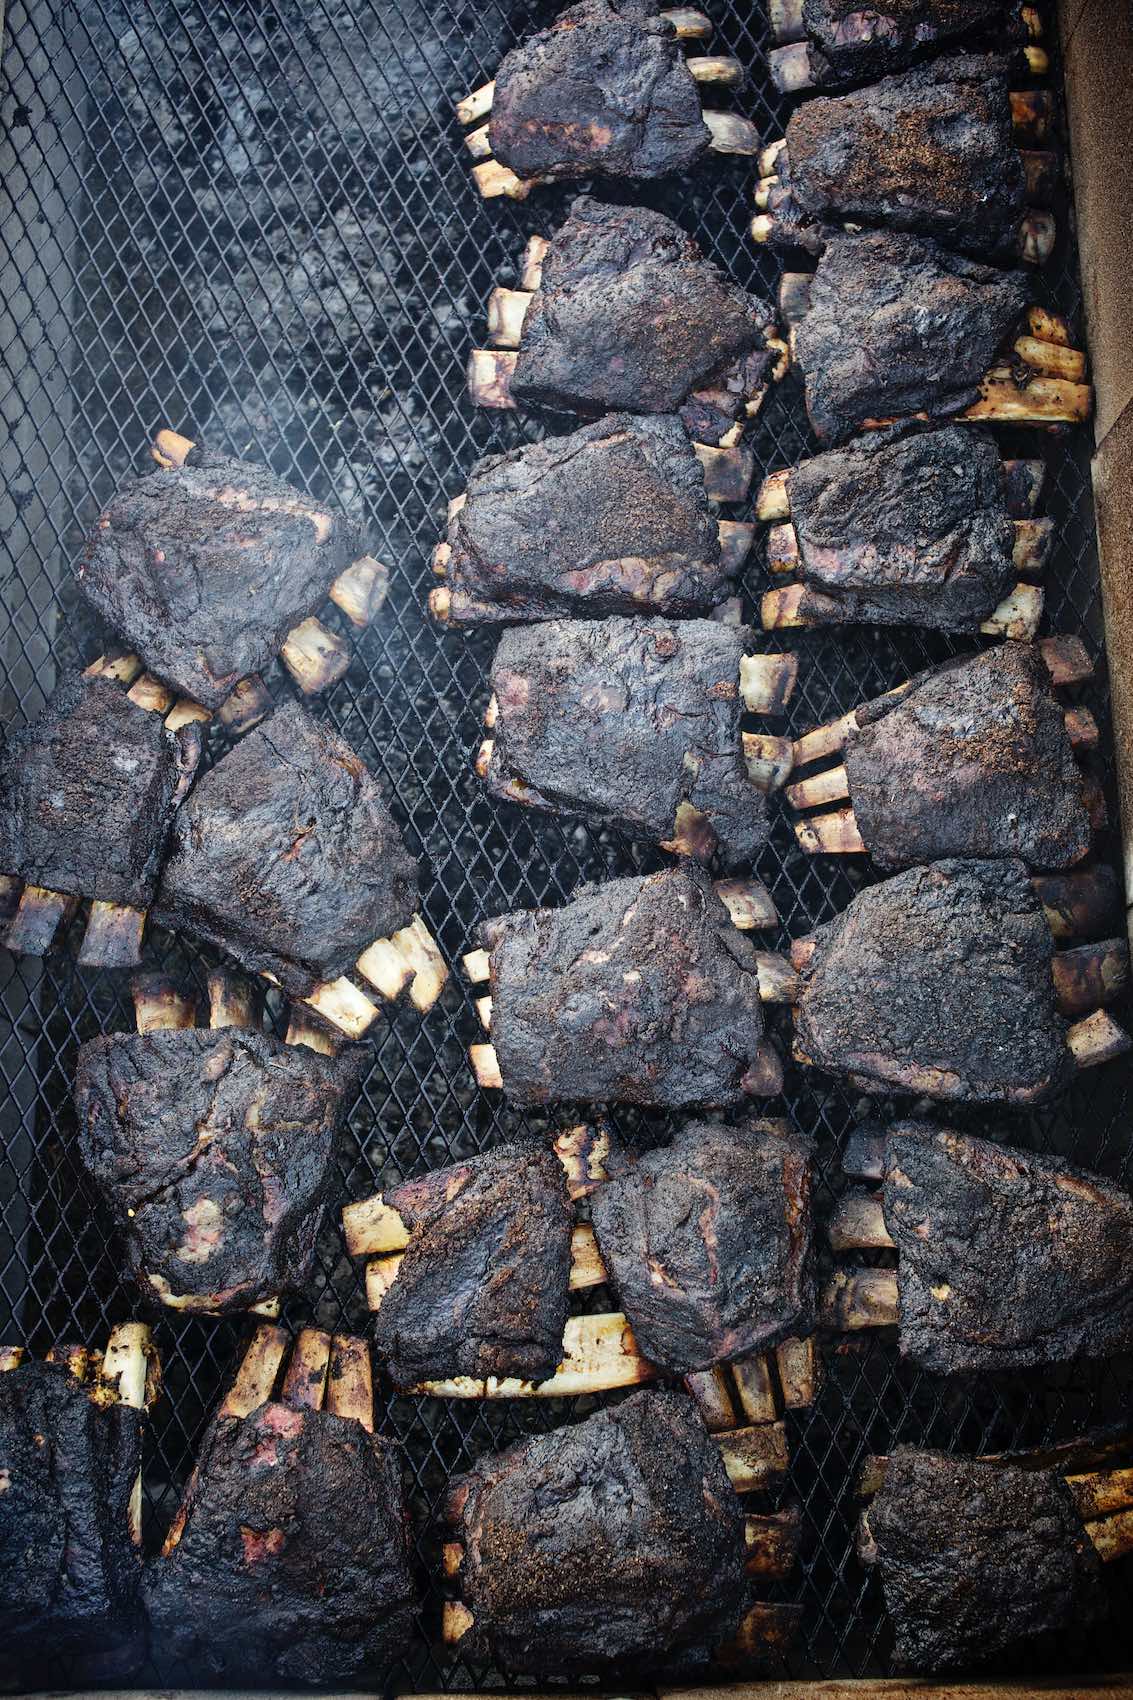 Jody Horton Photography - Blackened ribs cooking on grill grate.